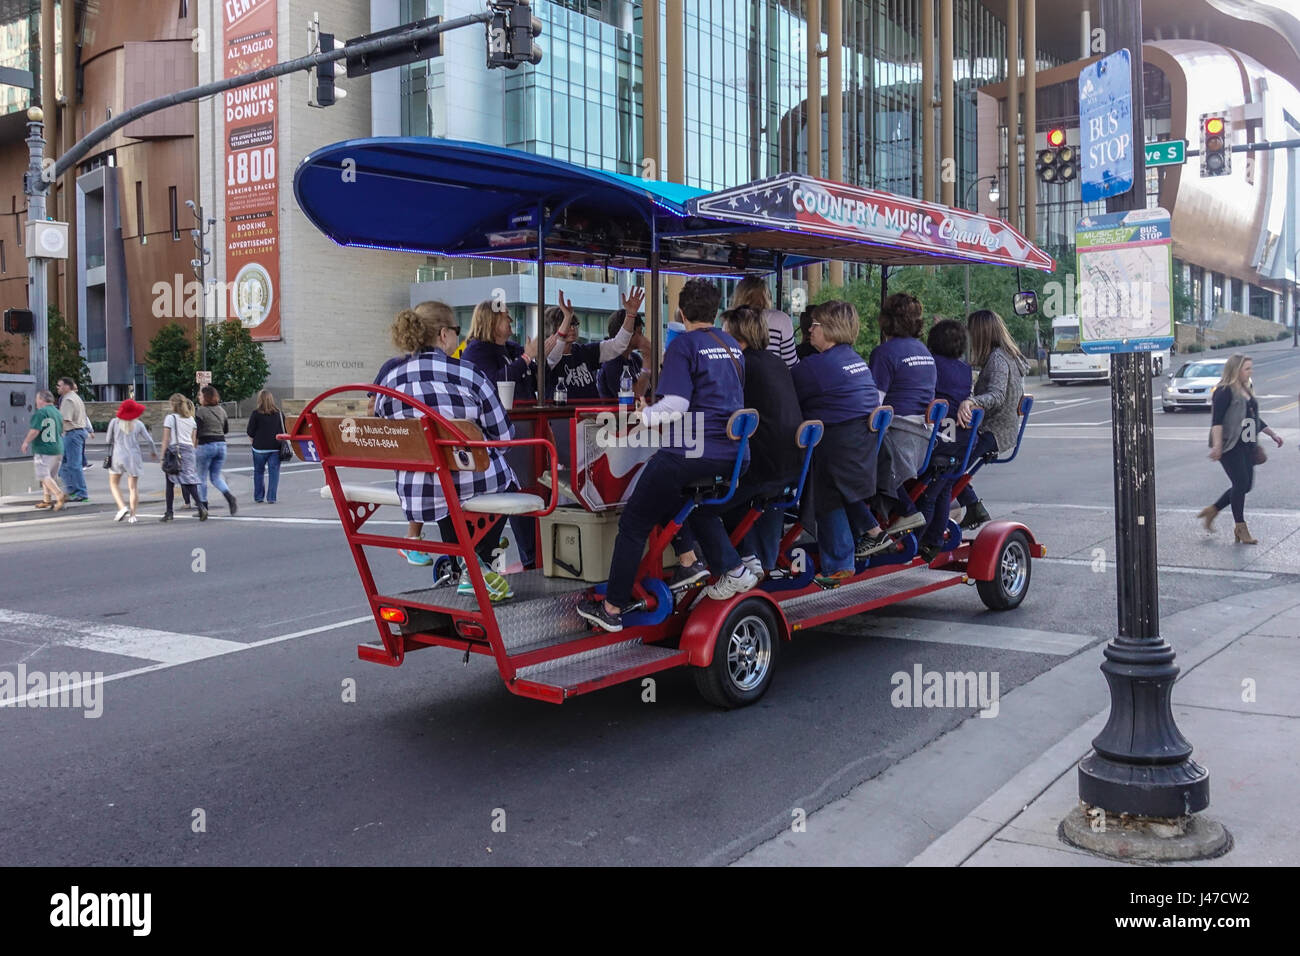 Pedal-powered bus touring Nashville city sights. Stock Photo